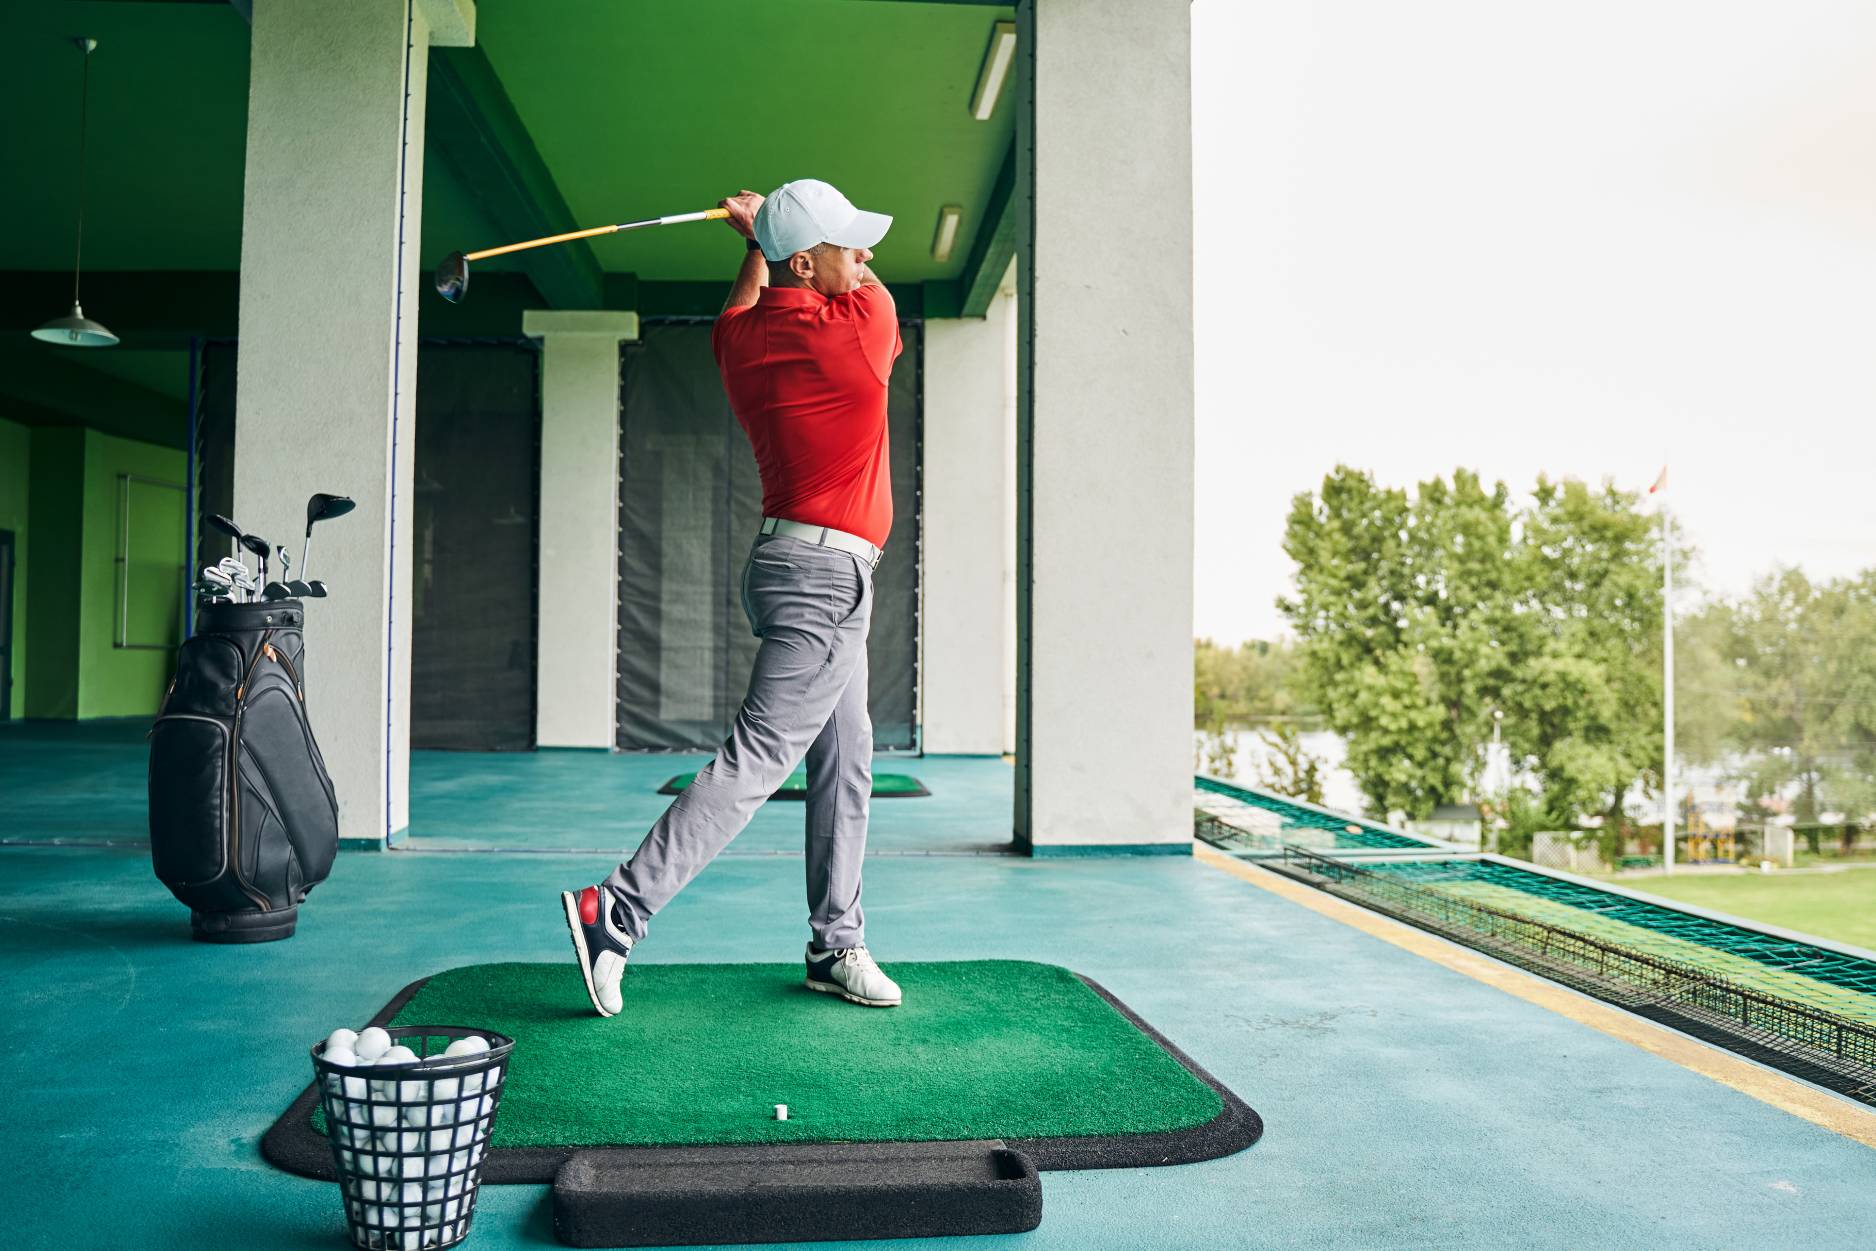 Featured image for “The Top Golf Influence”